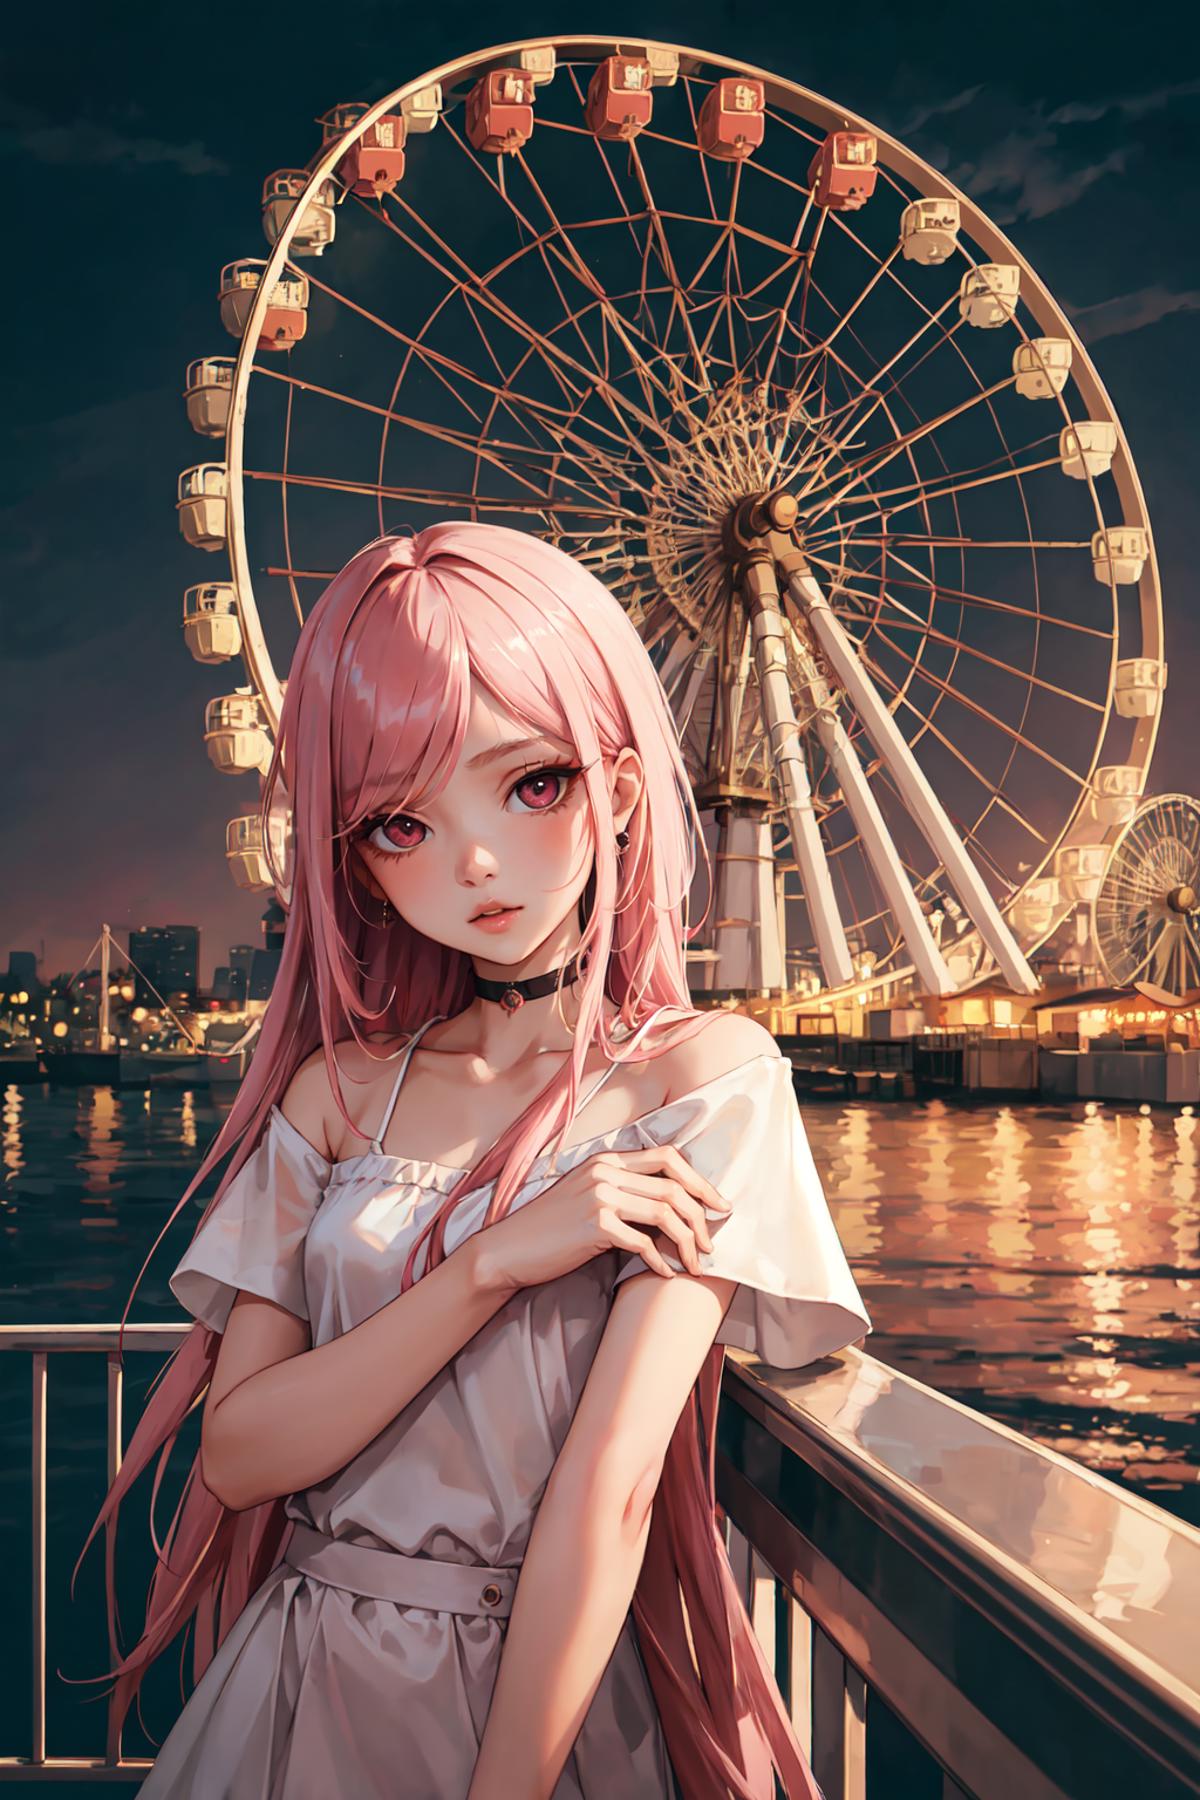 Pink-haired girl posing on a ferris wheel at night.